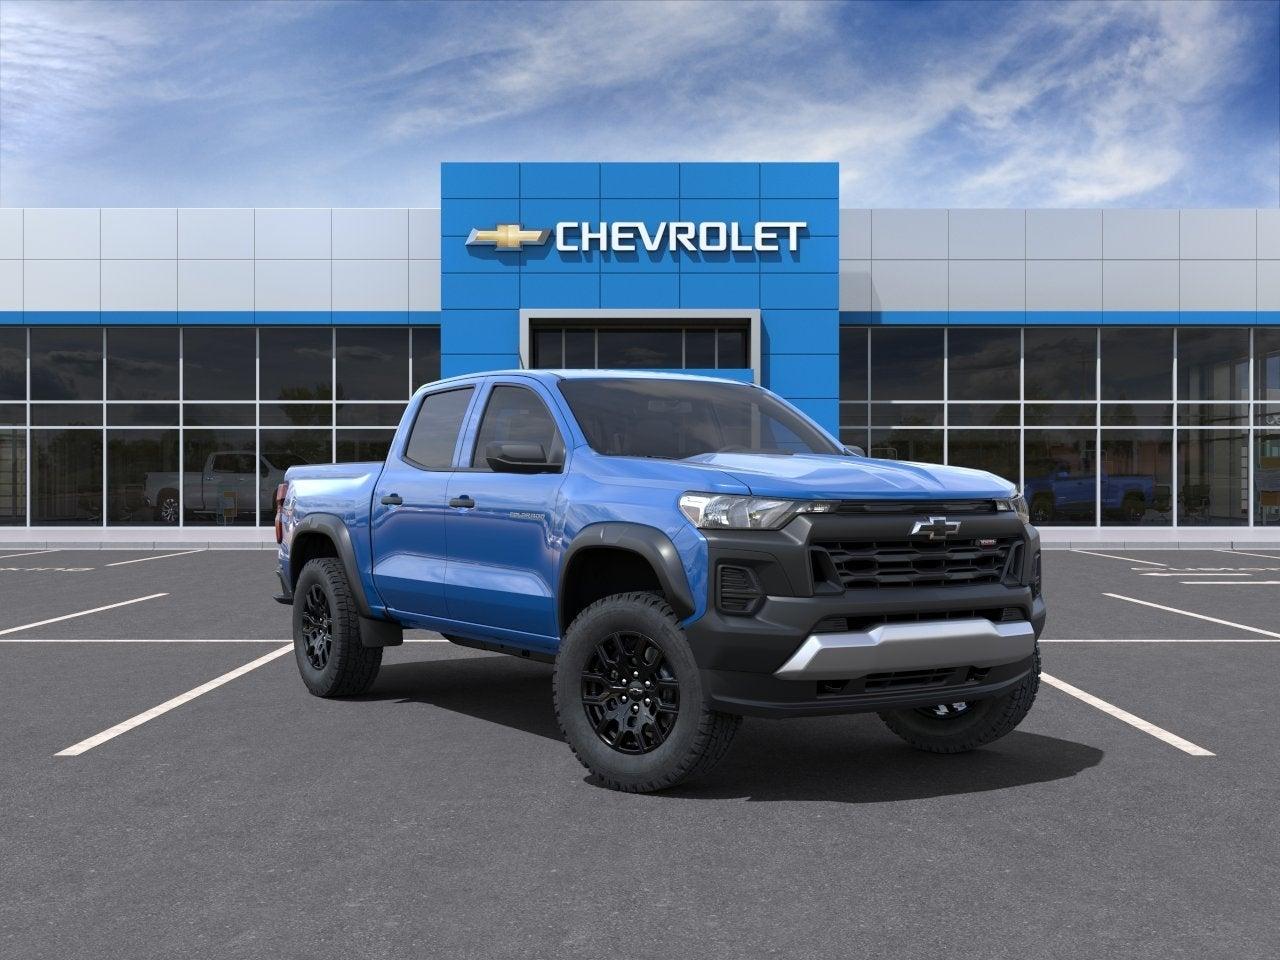 2023 Chevrolet Colorado Photo in Wooster, OH 44691